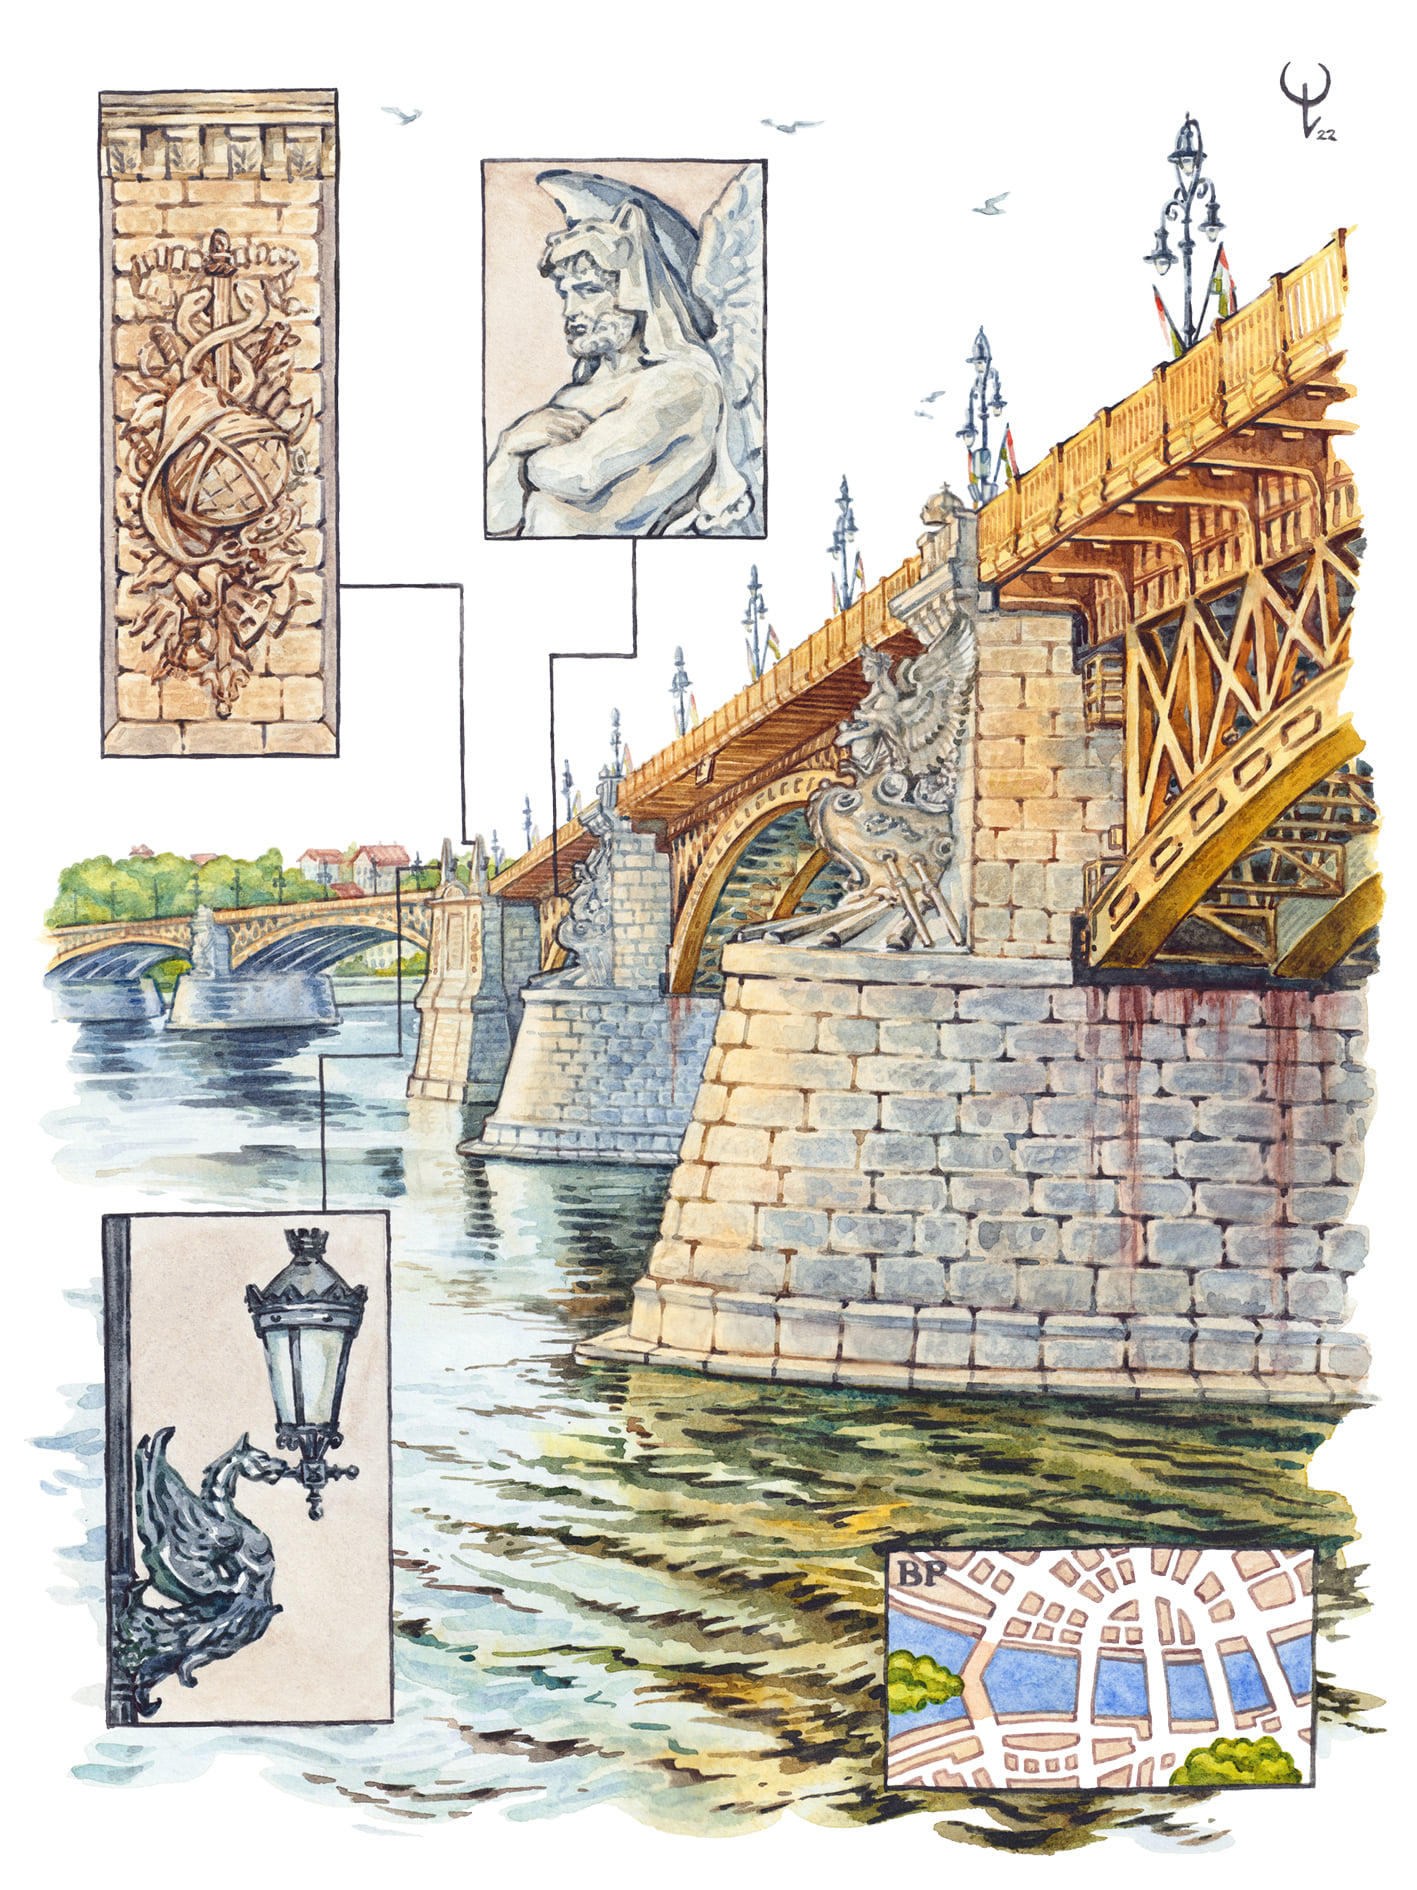 Watercolor (watercolour) painting of Margaret bridge in Budapest.